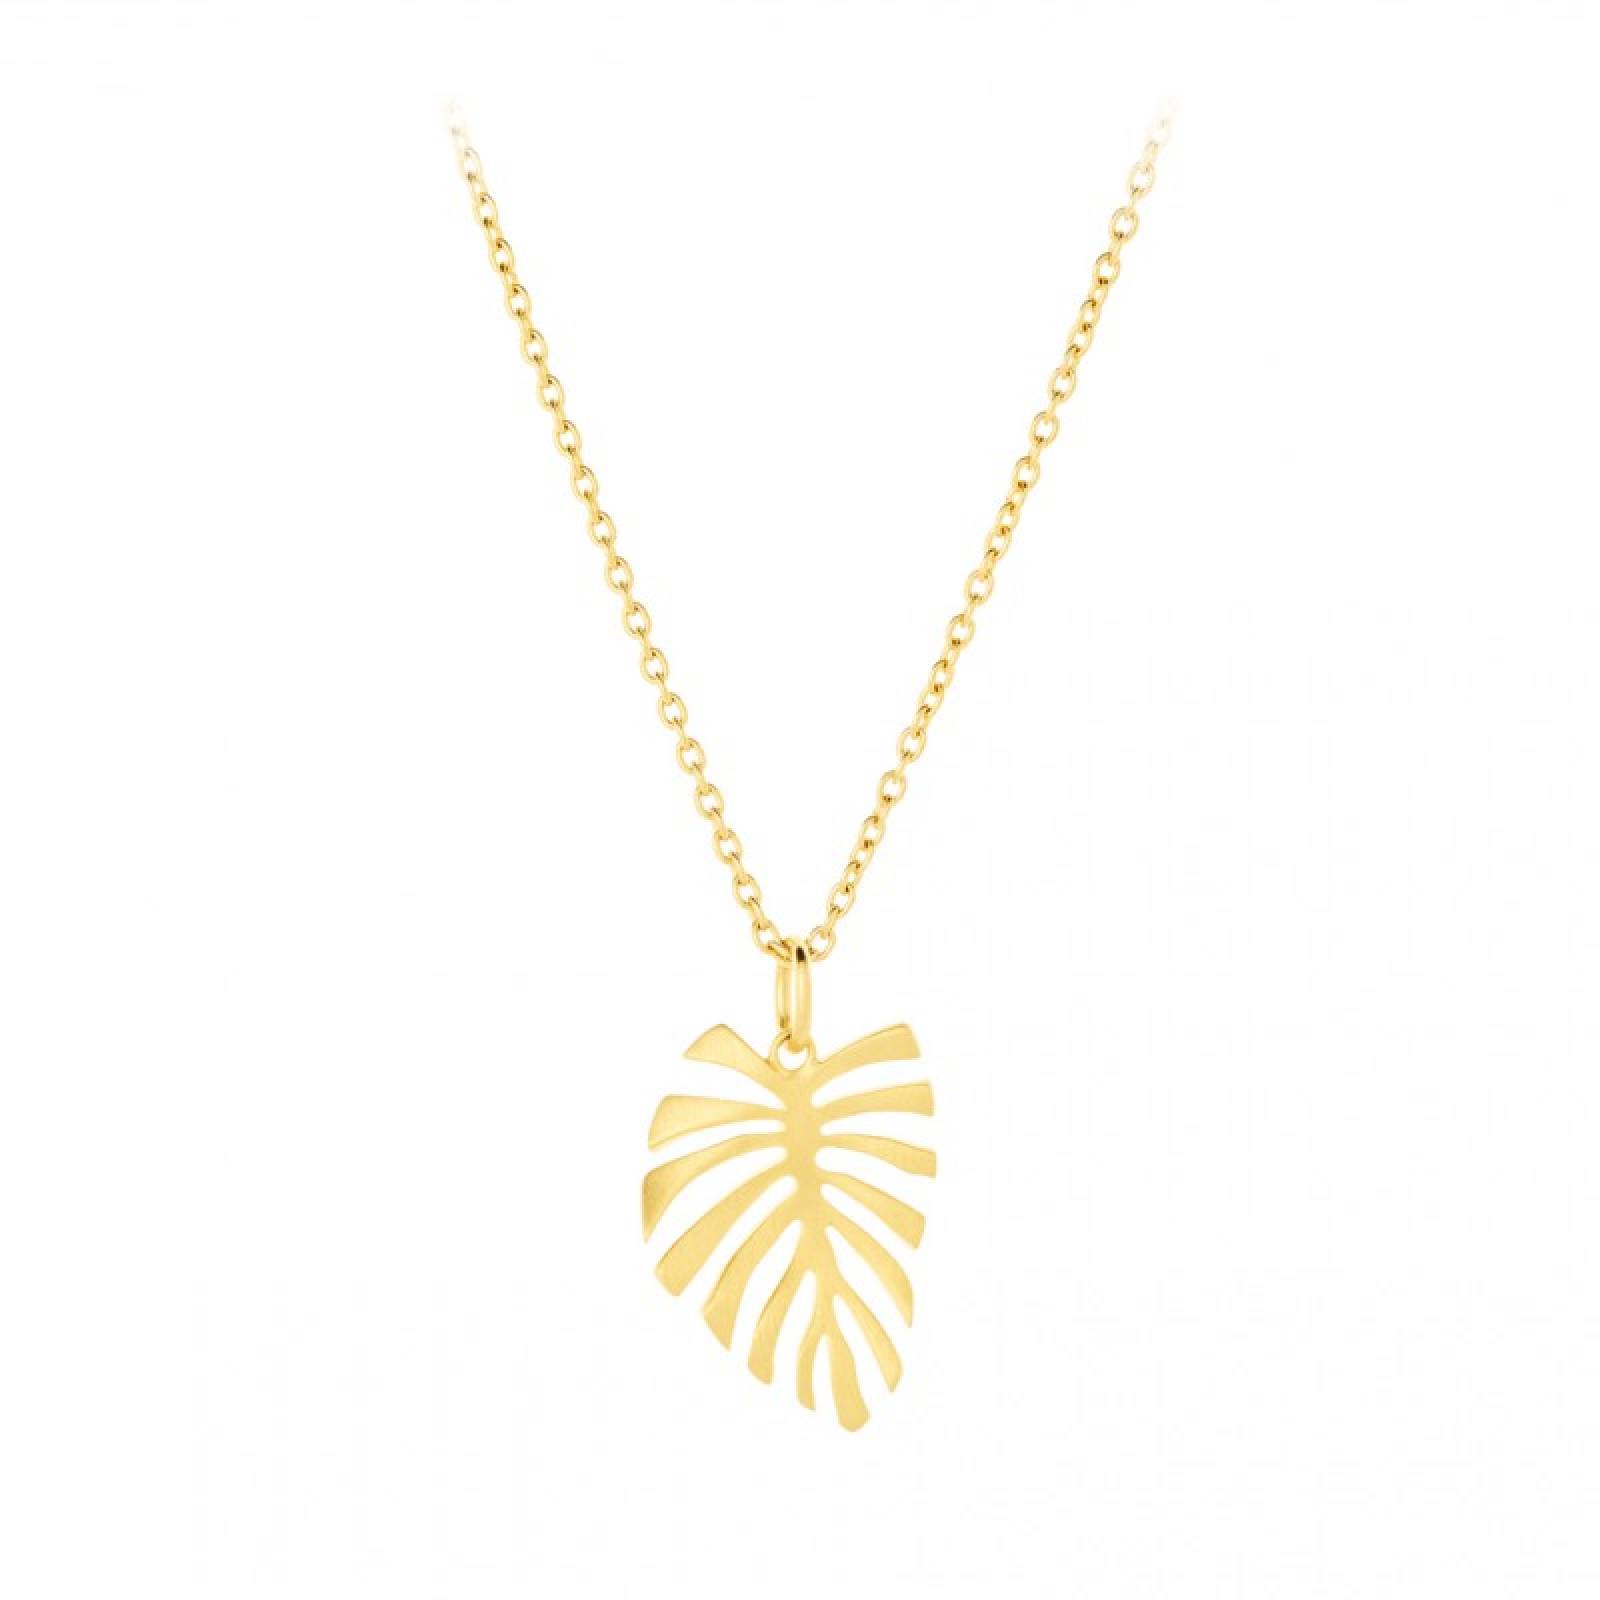 Fern Leaf Necklace In Gold By Pernille Corydon